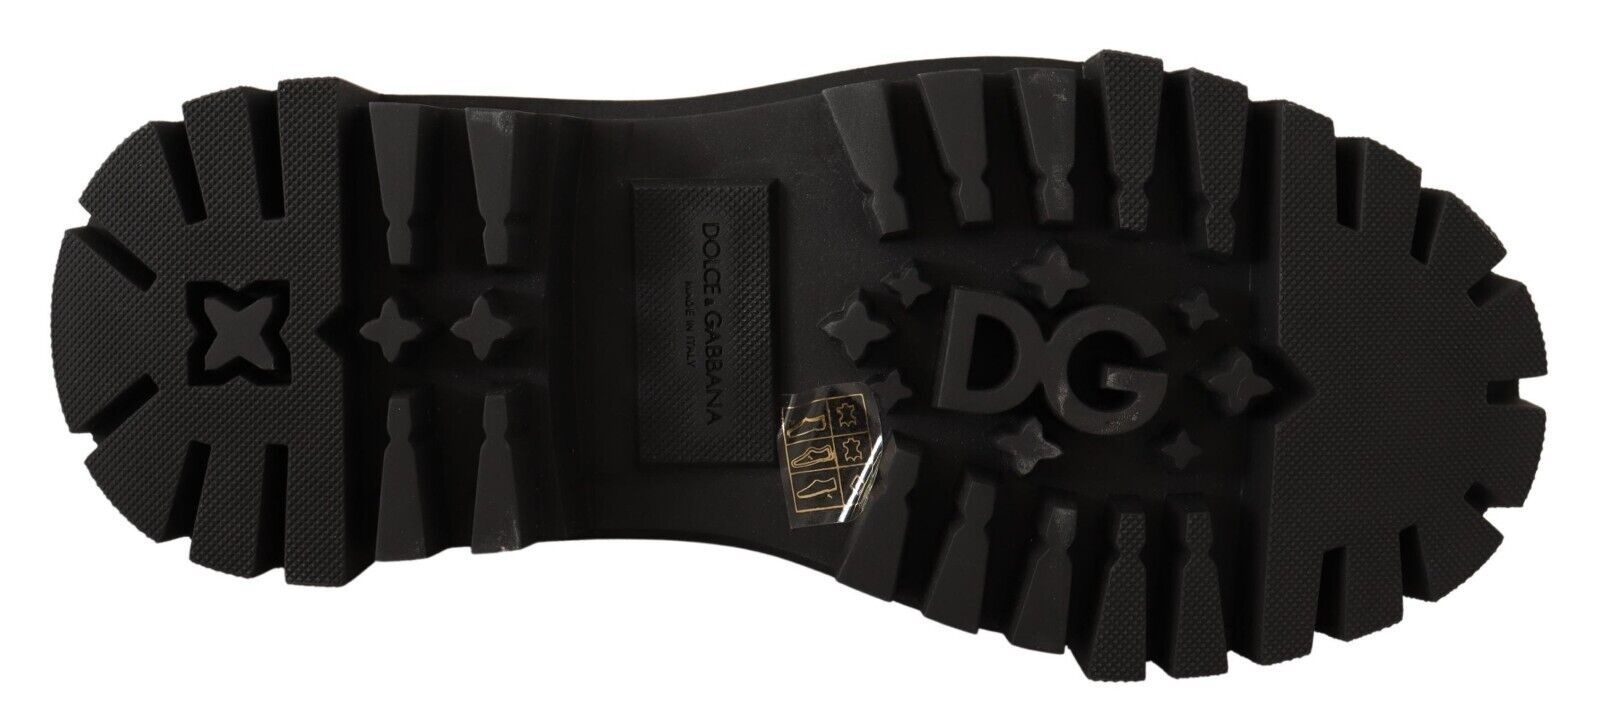 Dolce & Gabbana Studded Leather Combat Boots with Embroidery